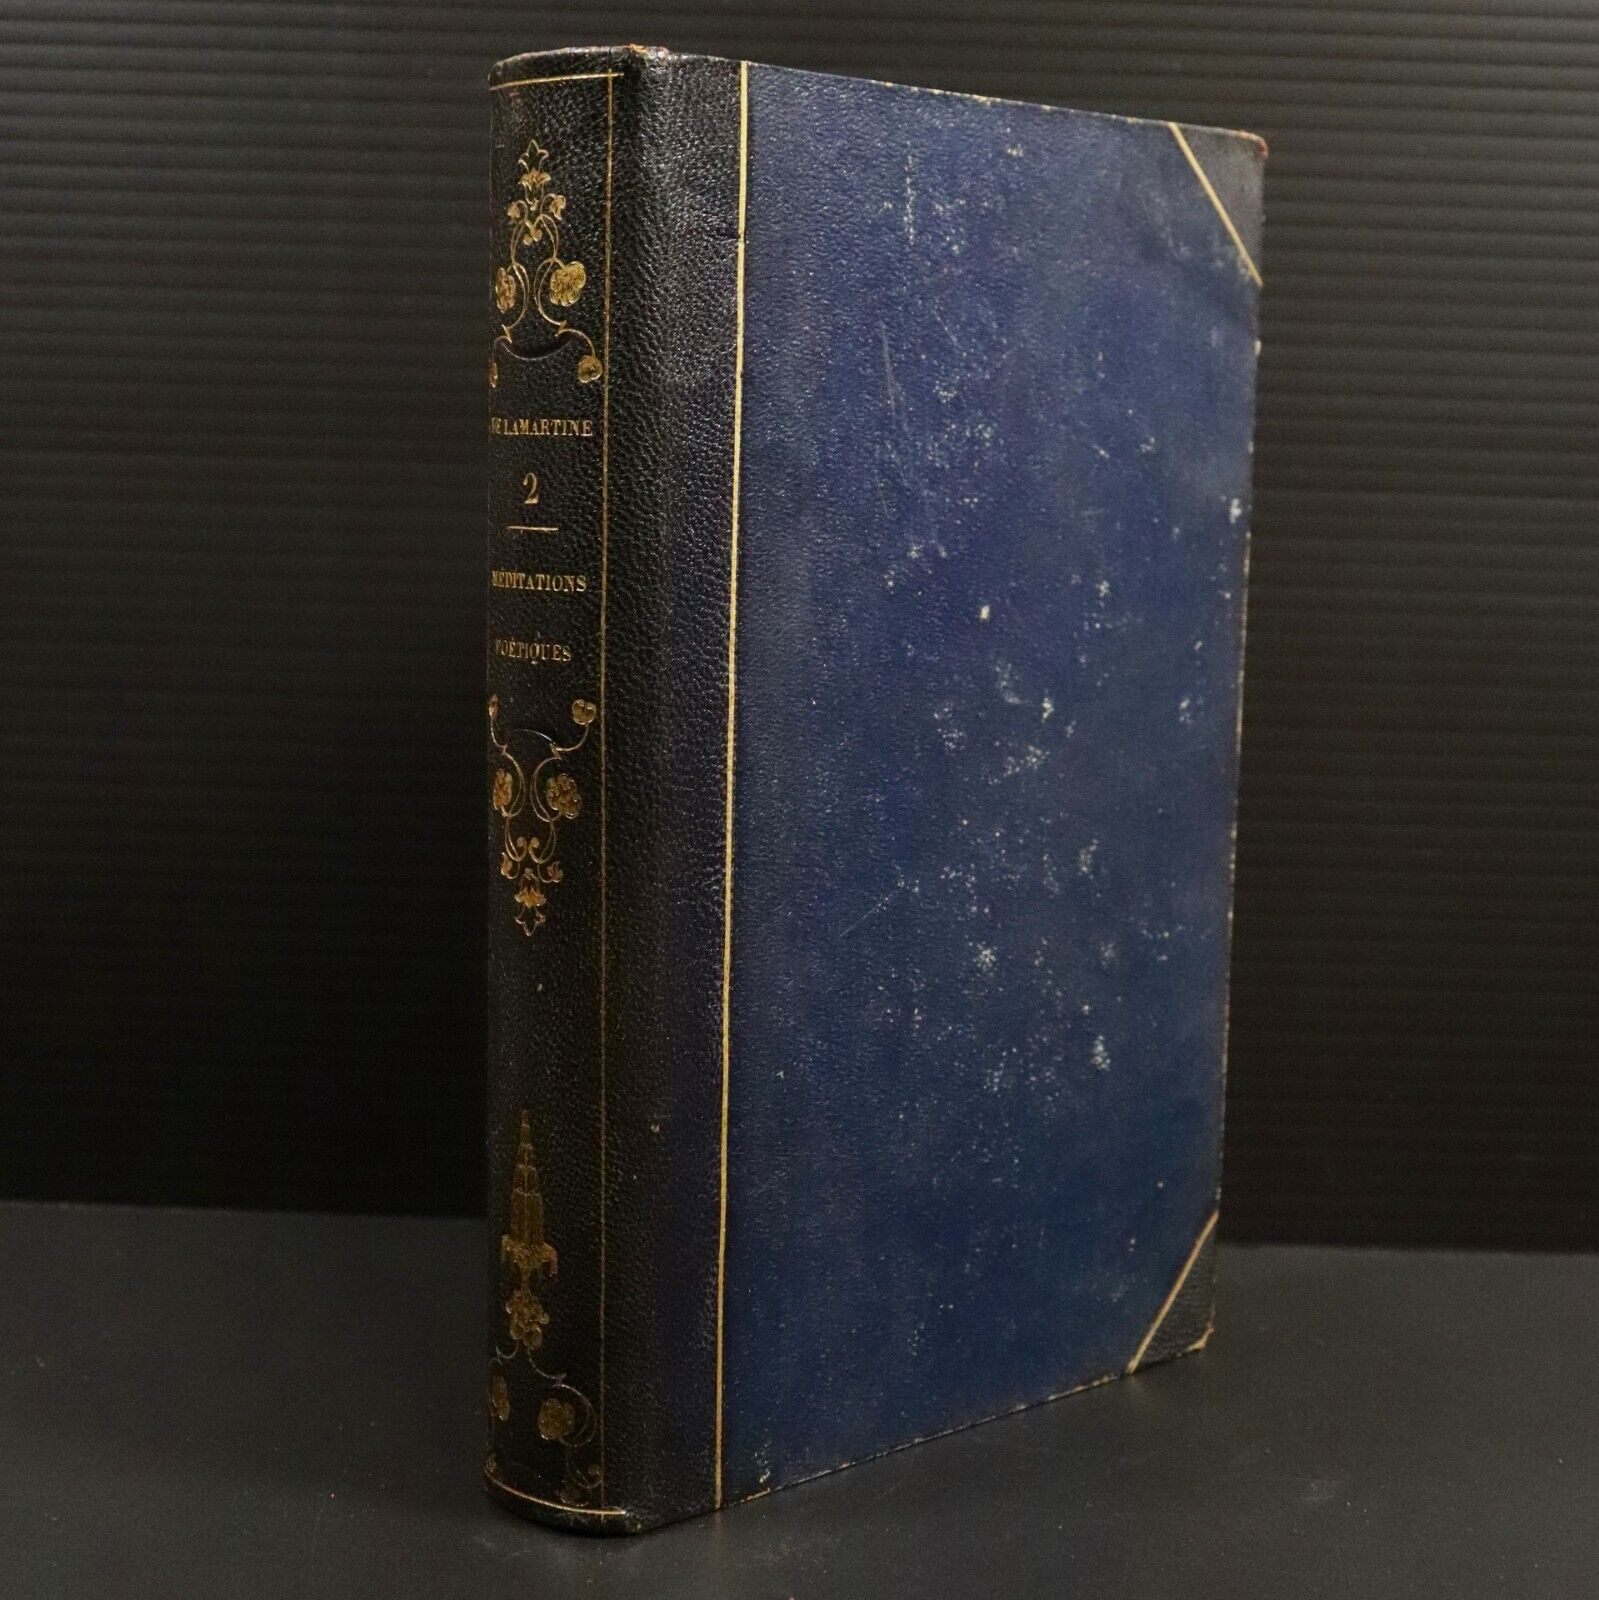 1837 Oeuvres Completes De Lamartine Antiquarian French Literature Book